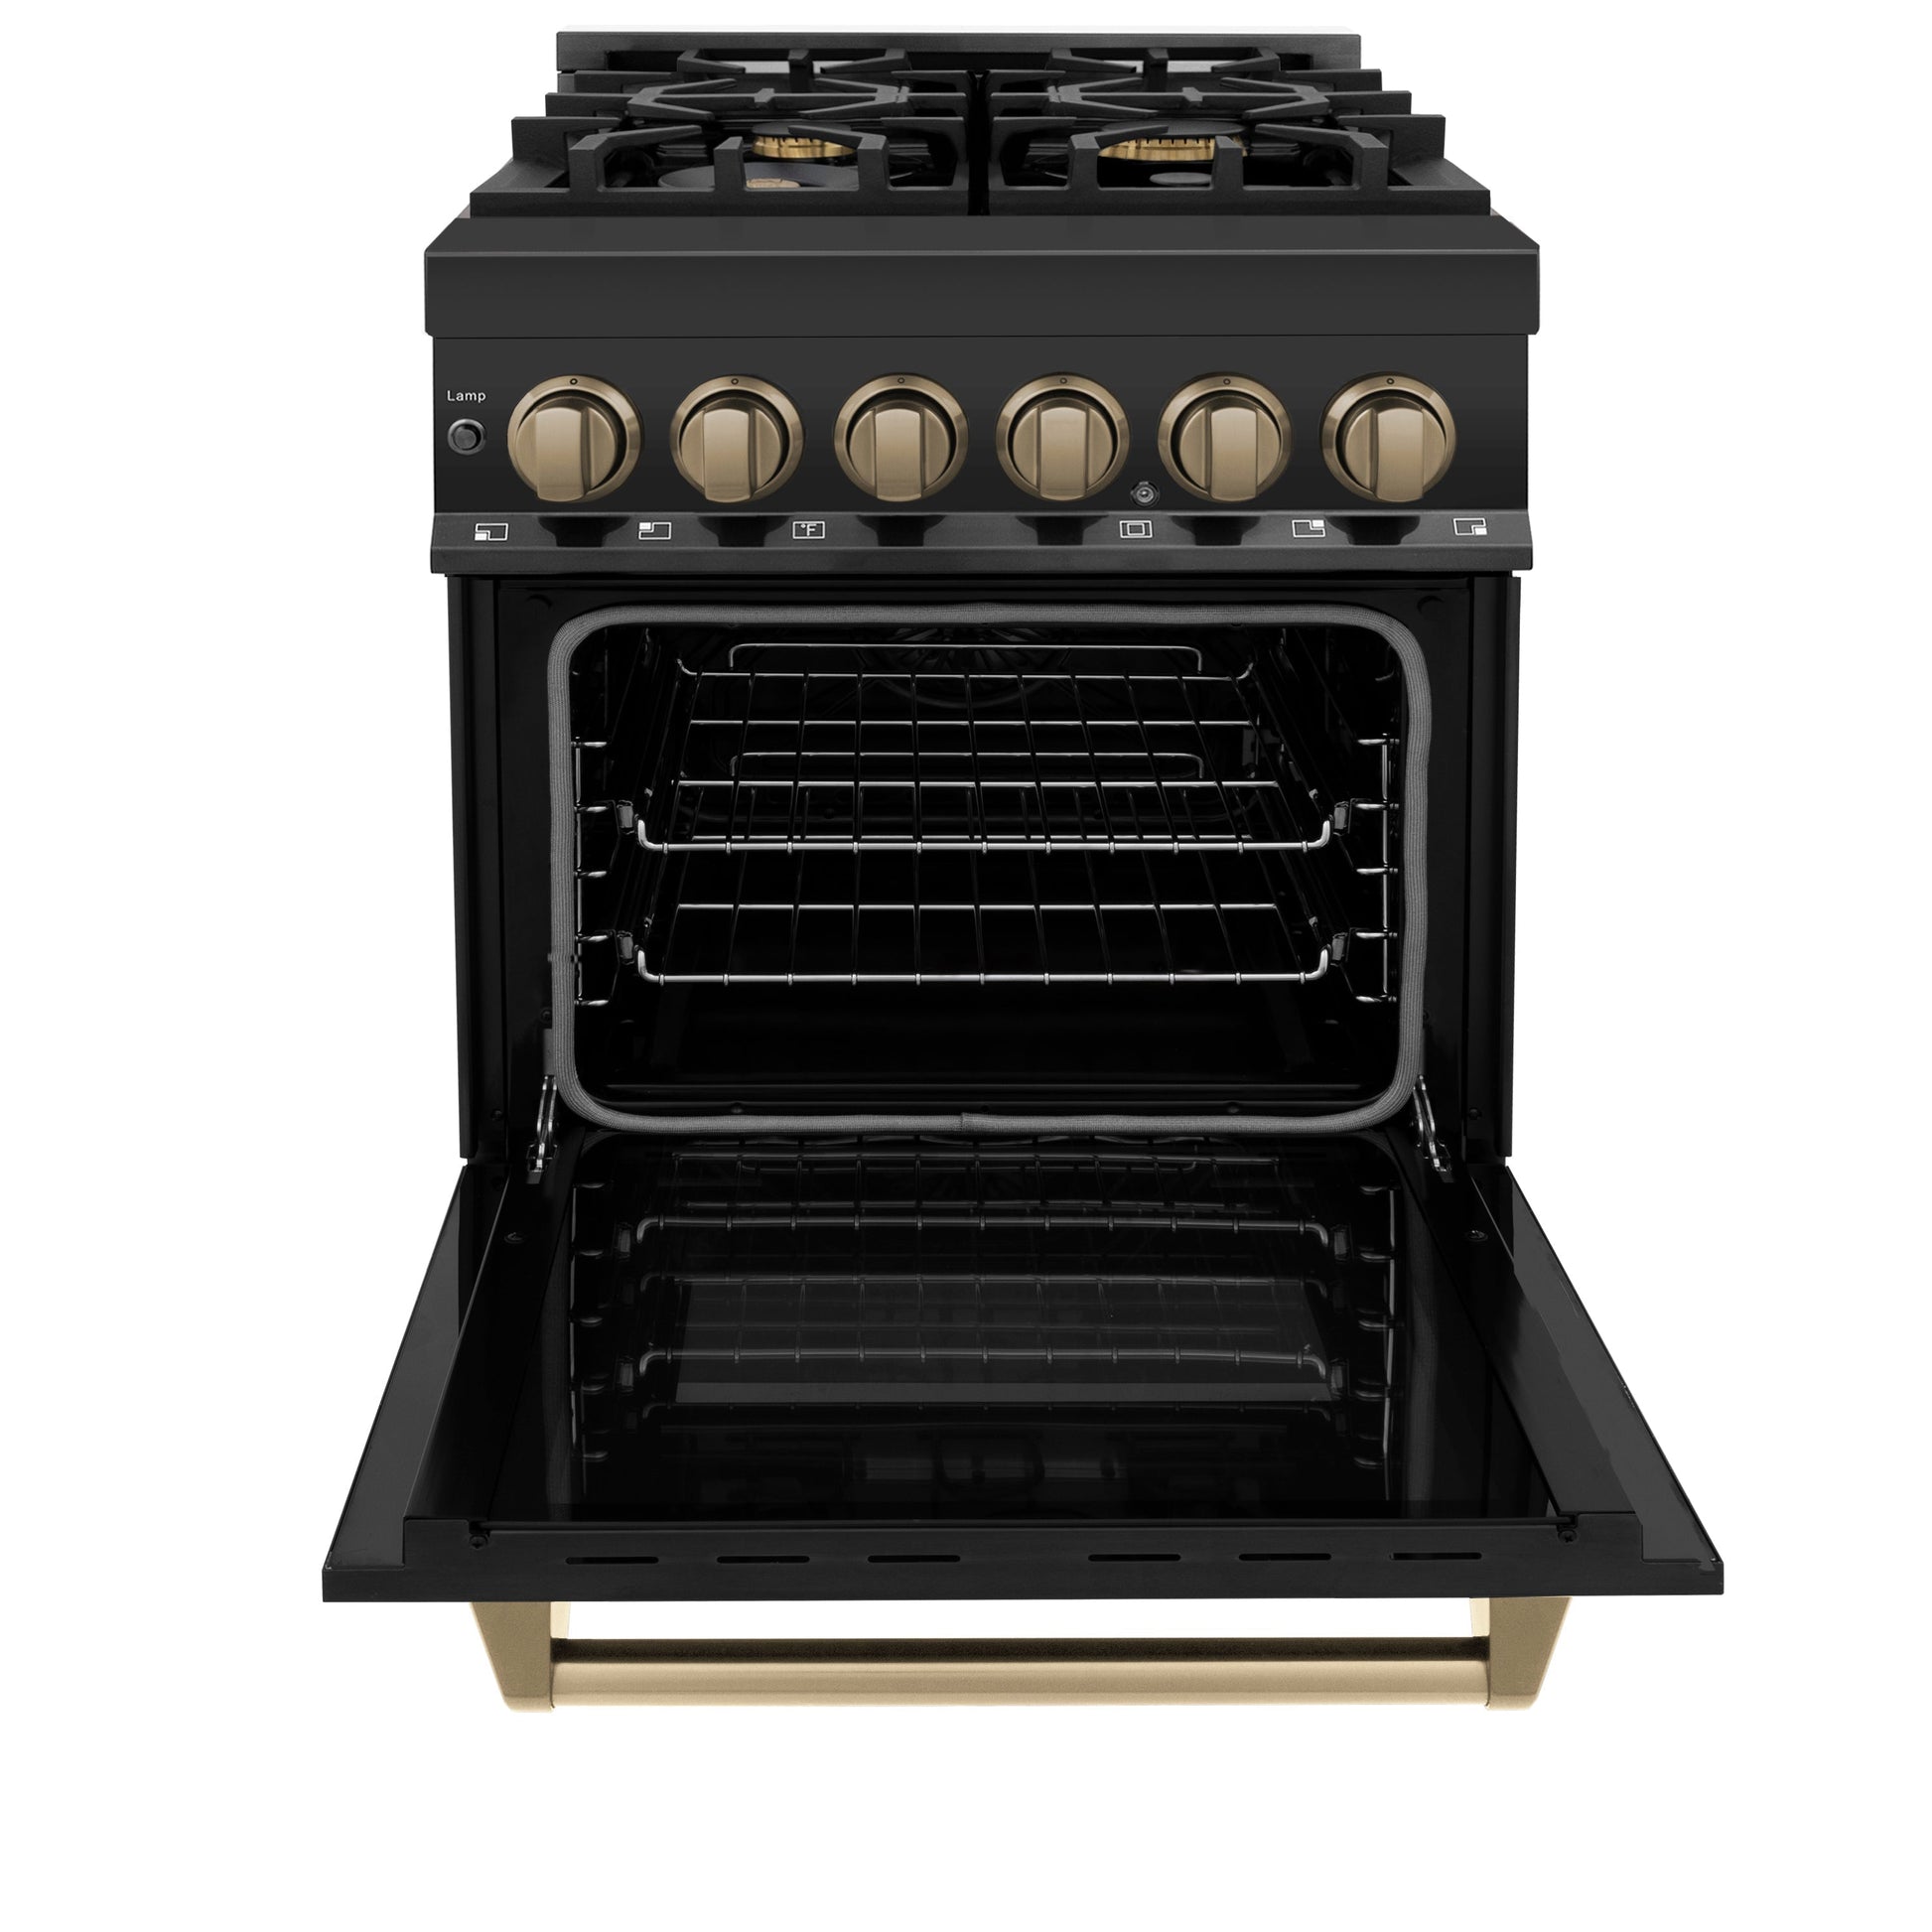 ZLINE Autograph Edition 24" Dual Fuel Range with Gas Stove and Electric Oven - Black Stainless Steel with Accents